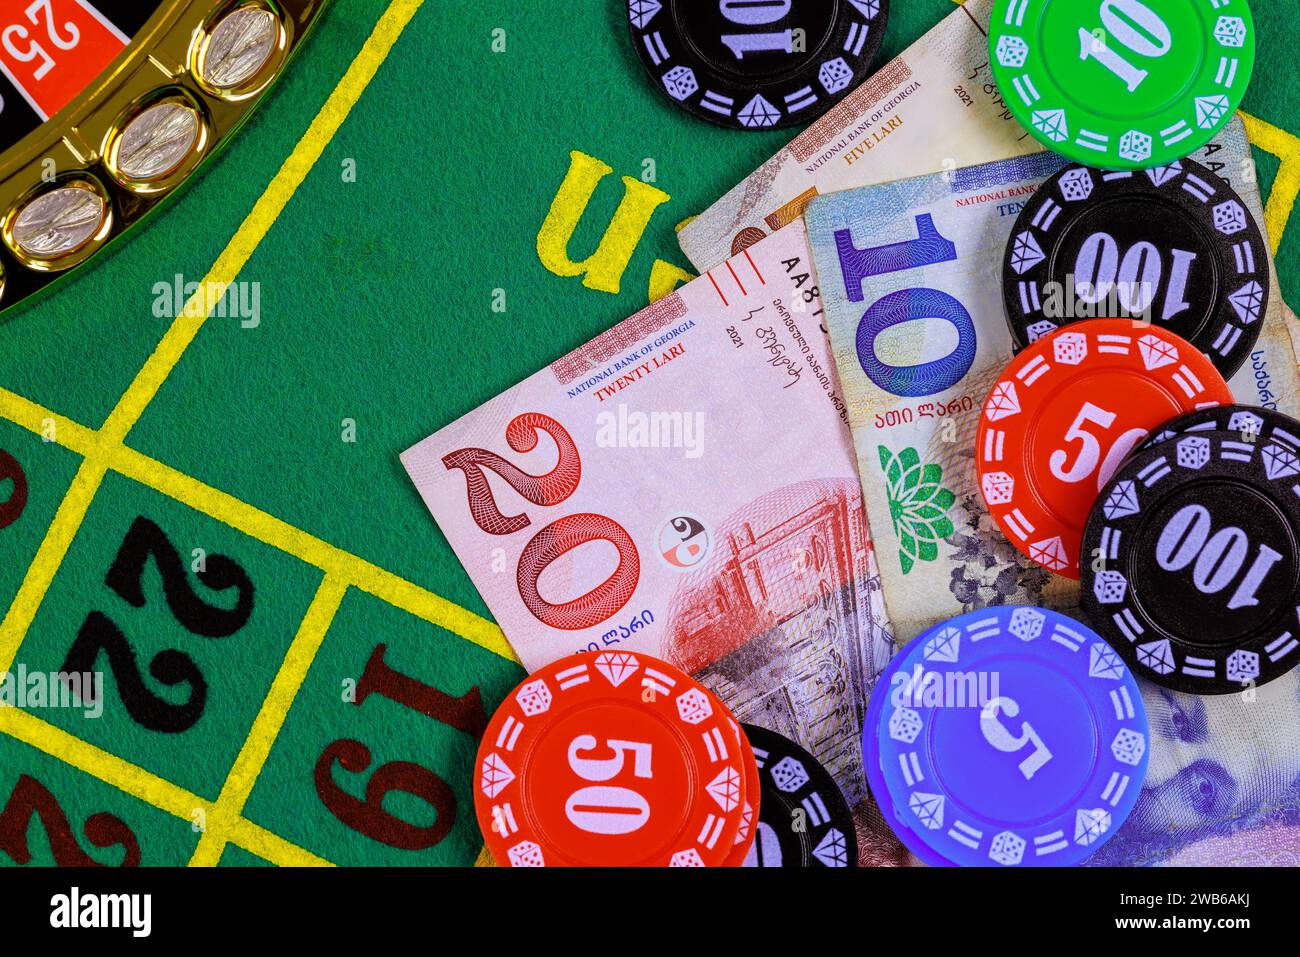 Roulette casino table is with Georgian banknotes, lari, poker chips. Stock Photo